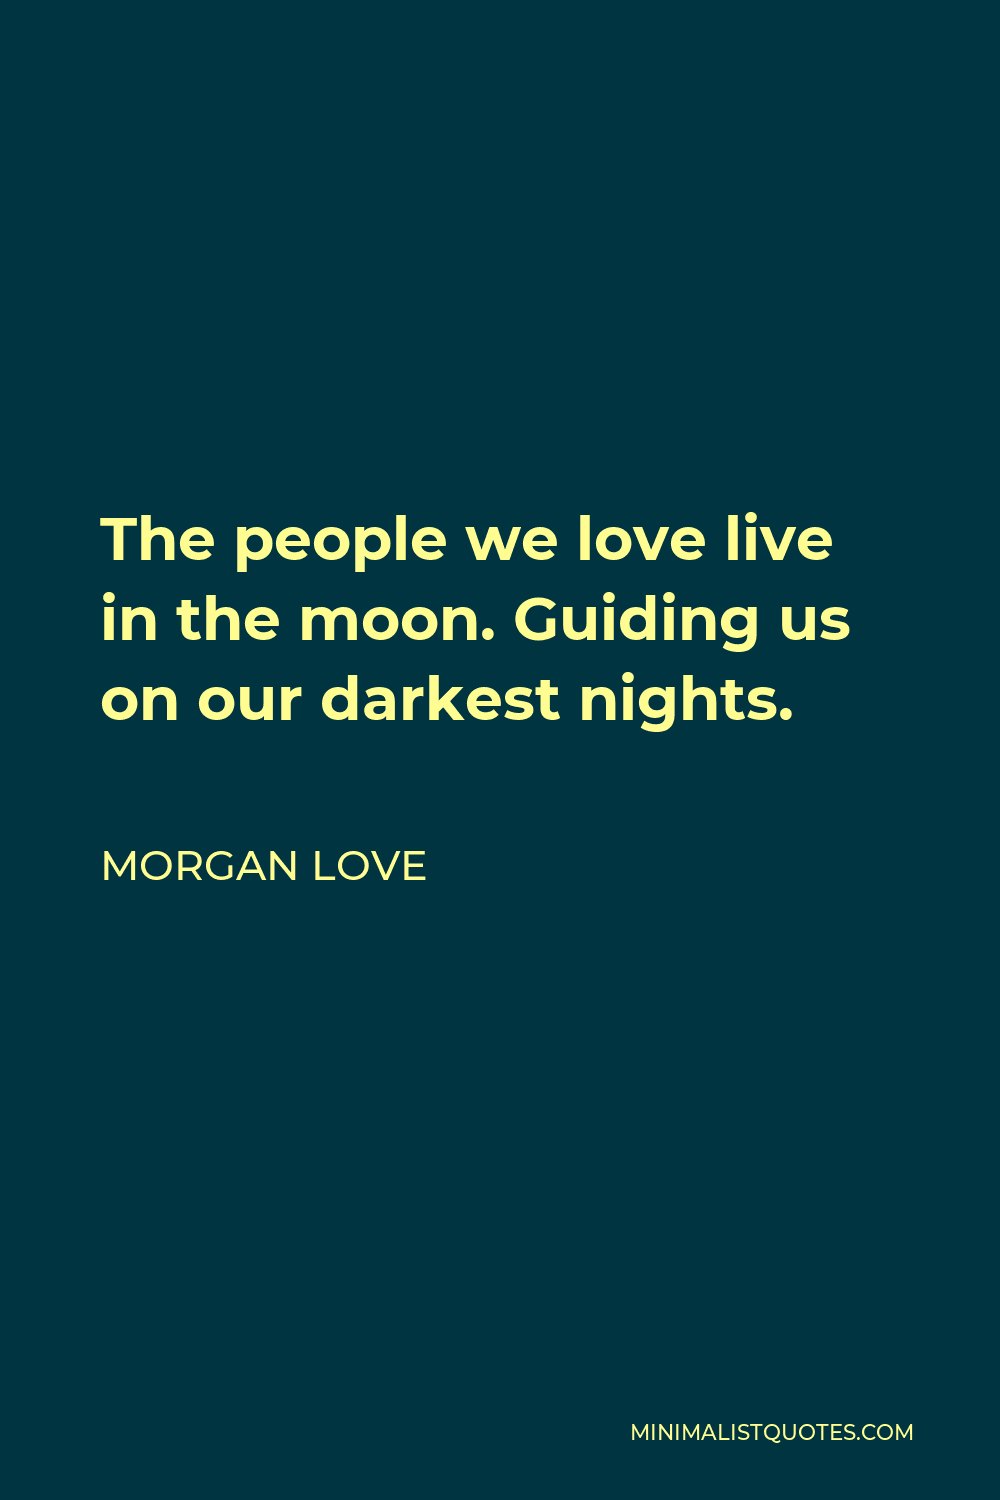 Morgan Love Quote - The people we love live in the moon. Guiding us on our darkest nights.